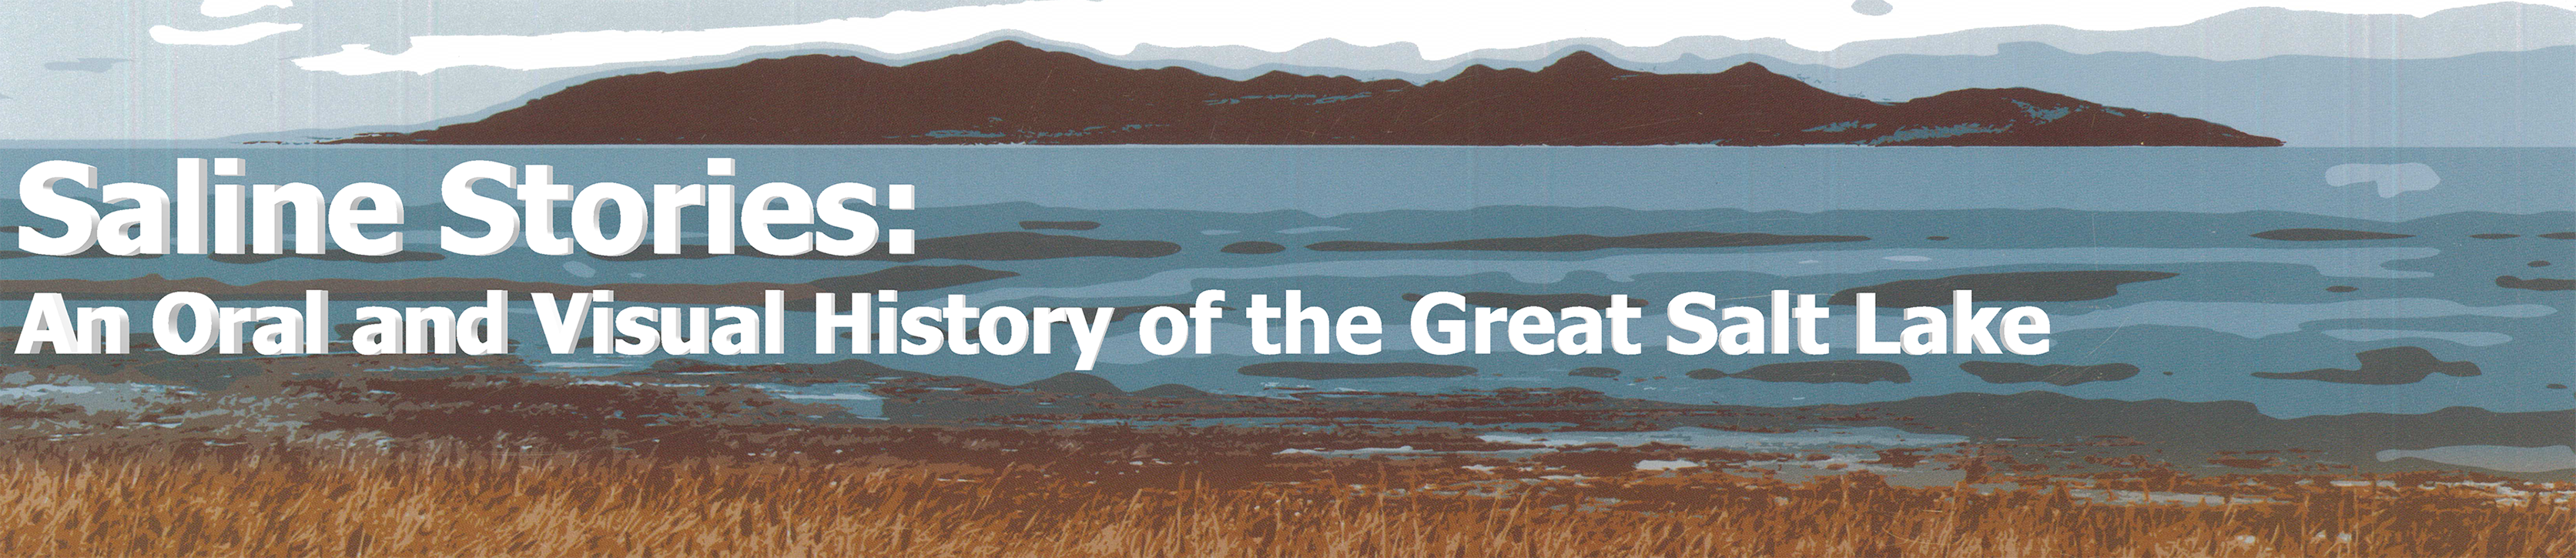 Saline Stories: An Oral and Visual History of the Great Salt Lake